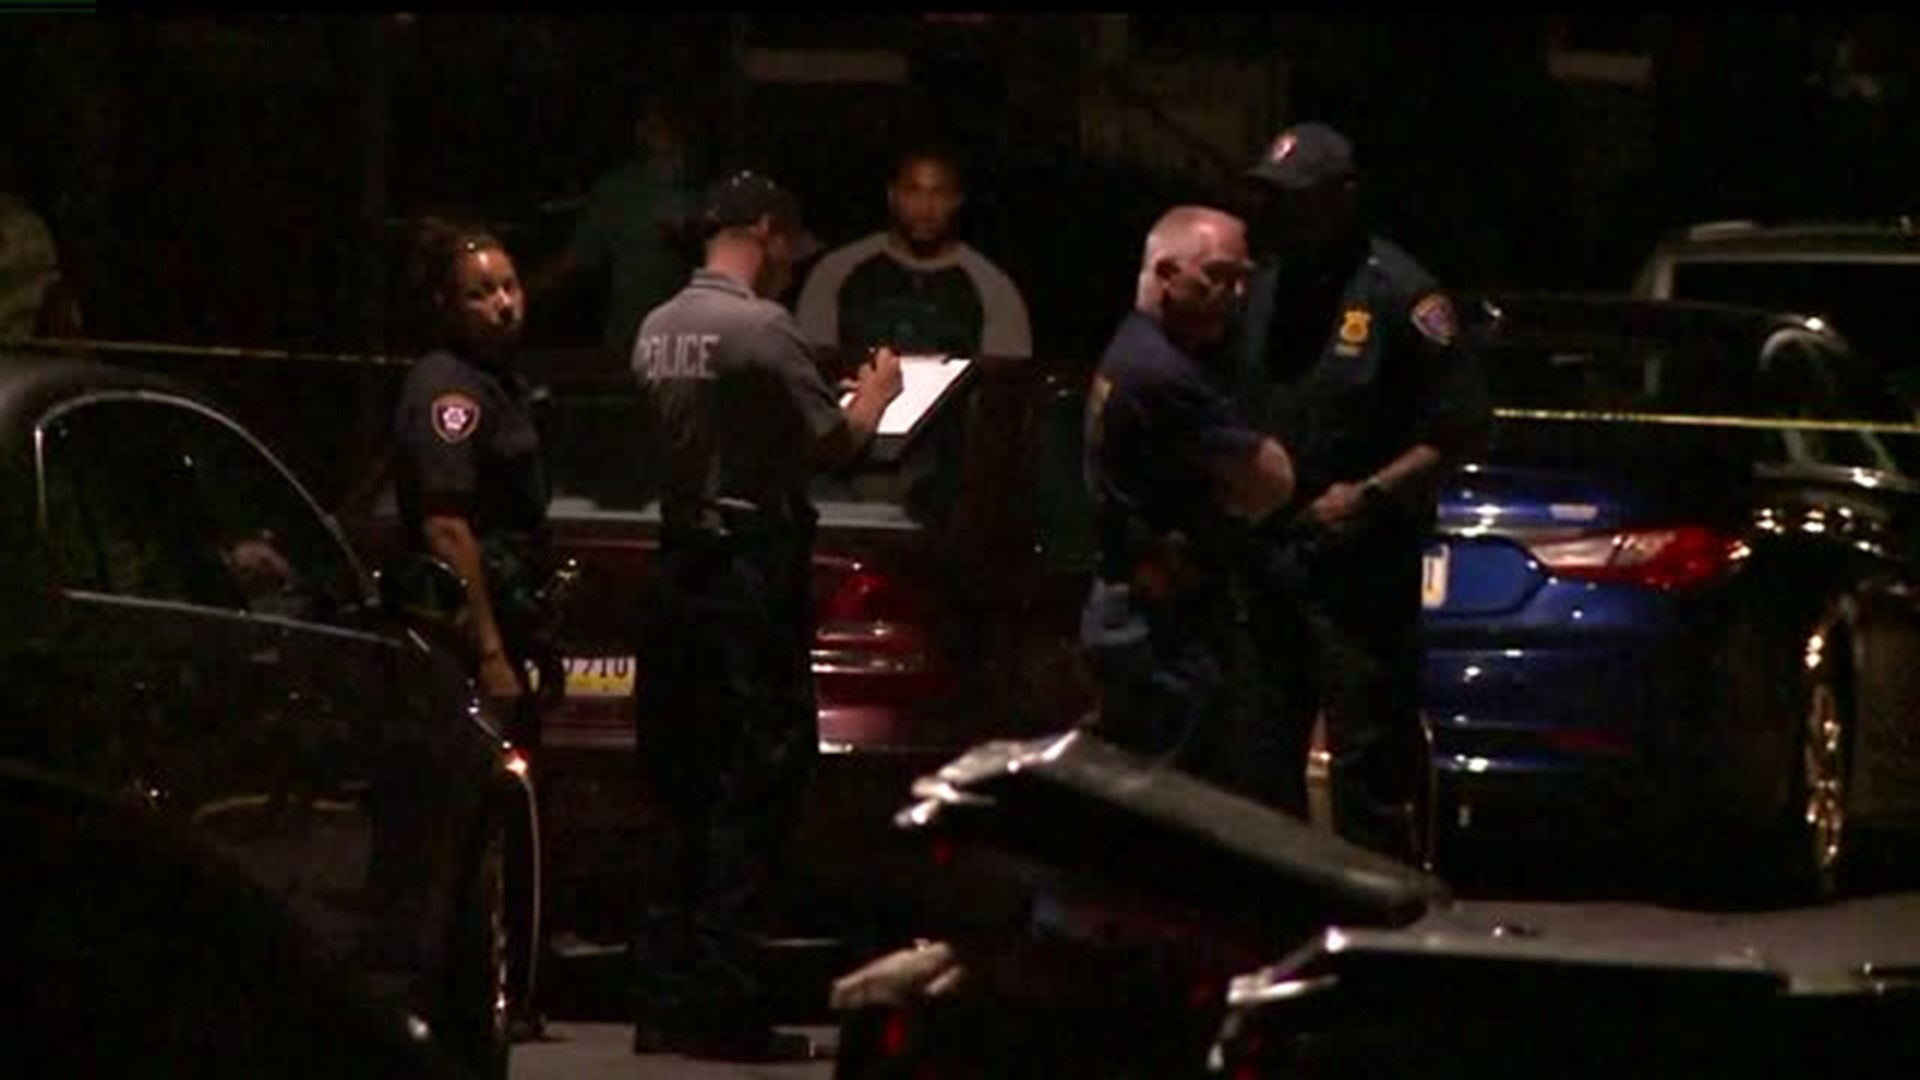 Man dead after officer involved shooting in Harrisburg